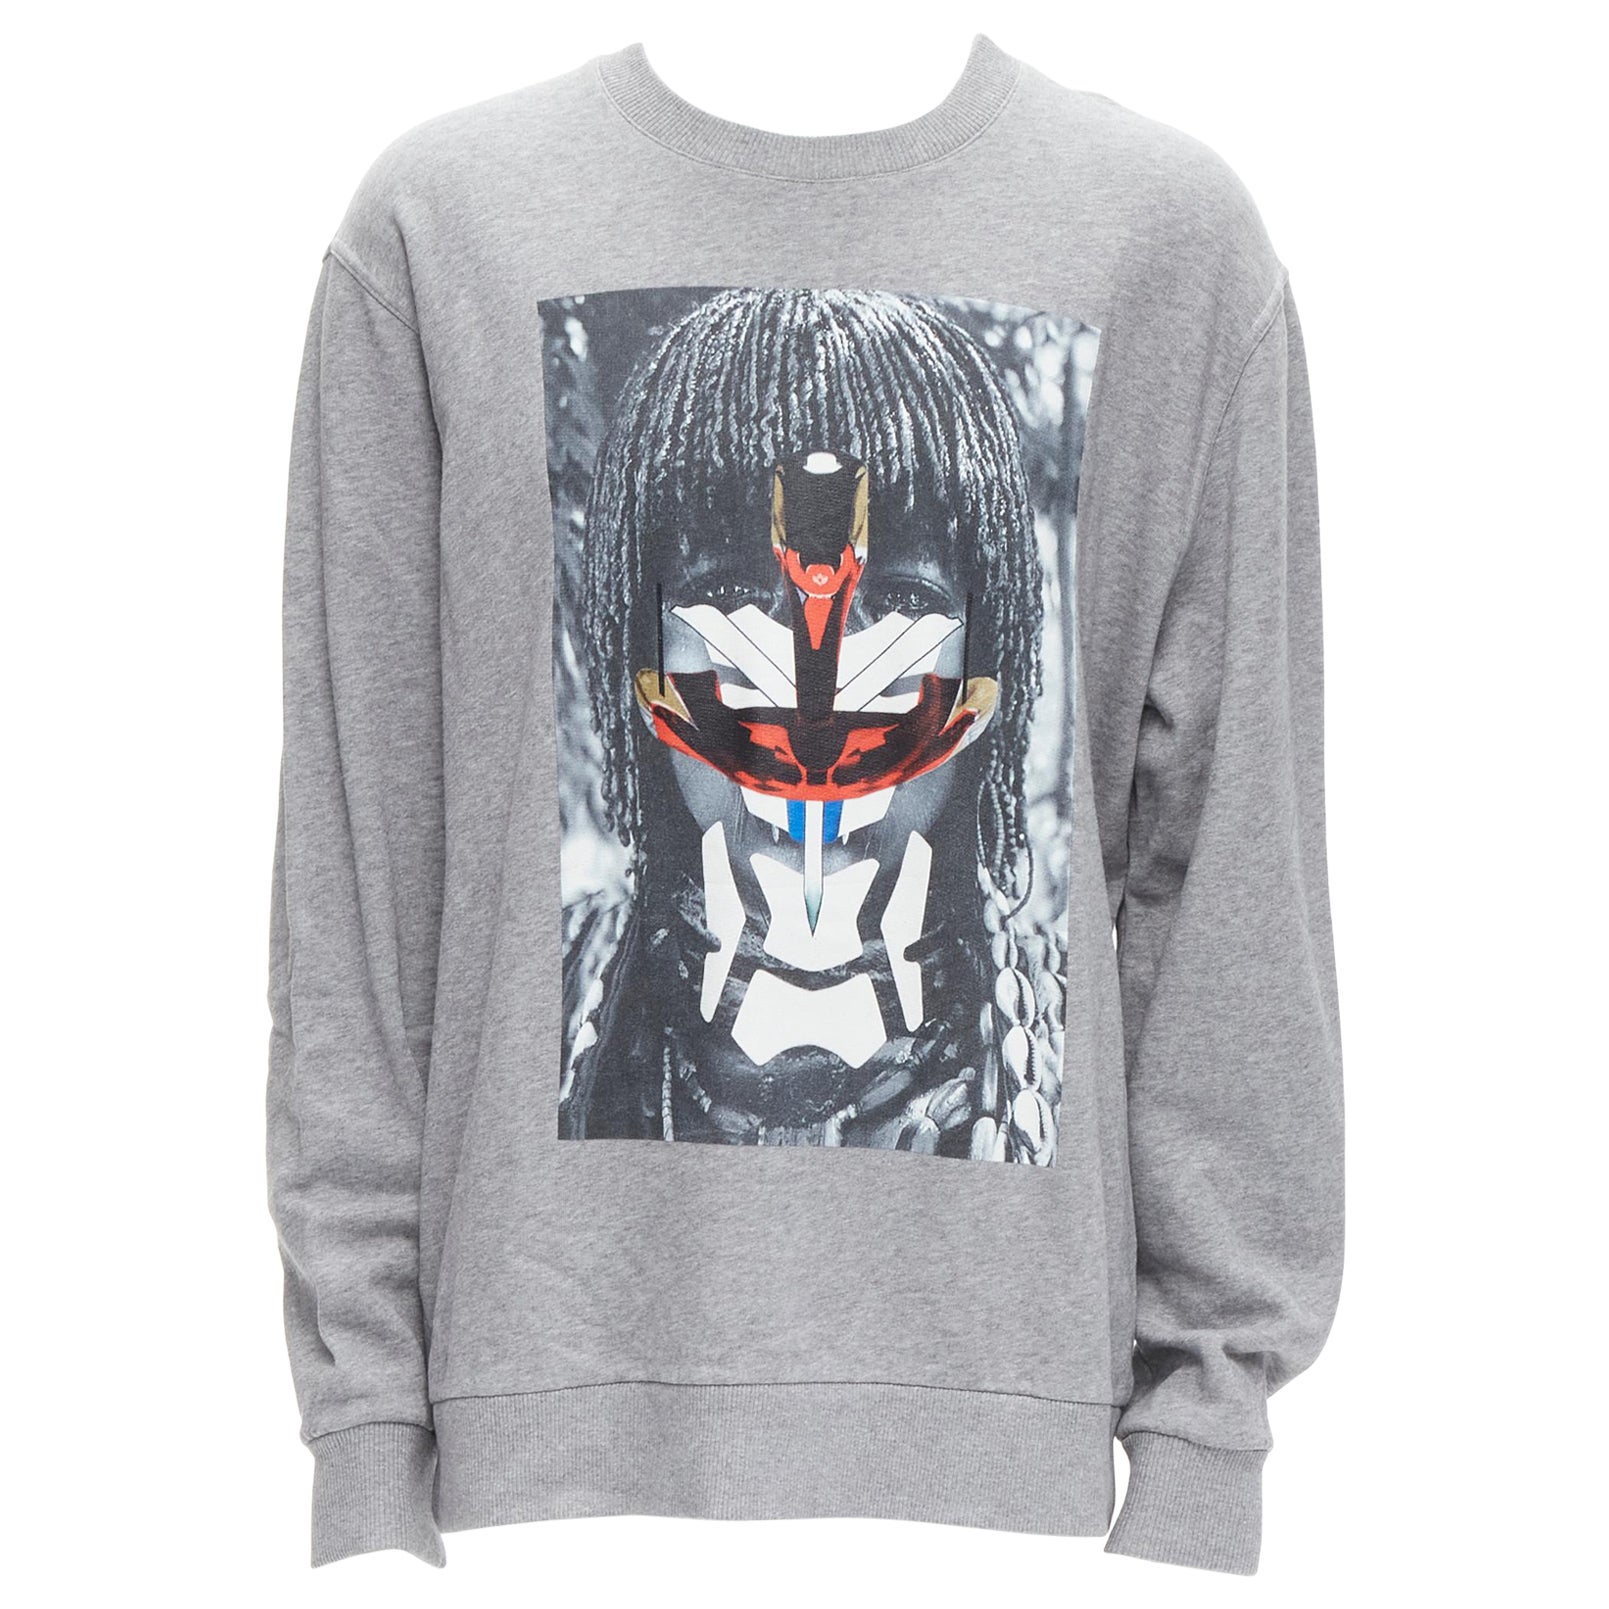 GIVENCHY Riccardo Tisci grey tribal girl graphic print cotton crew sweater S For Sale